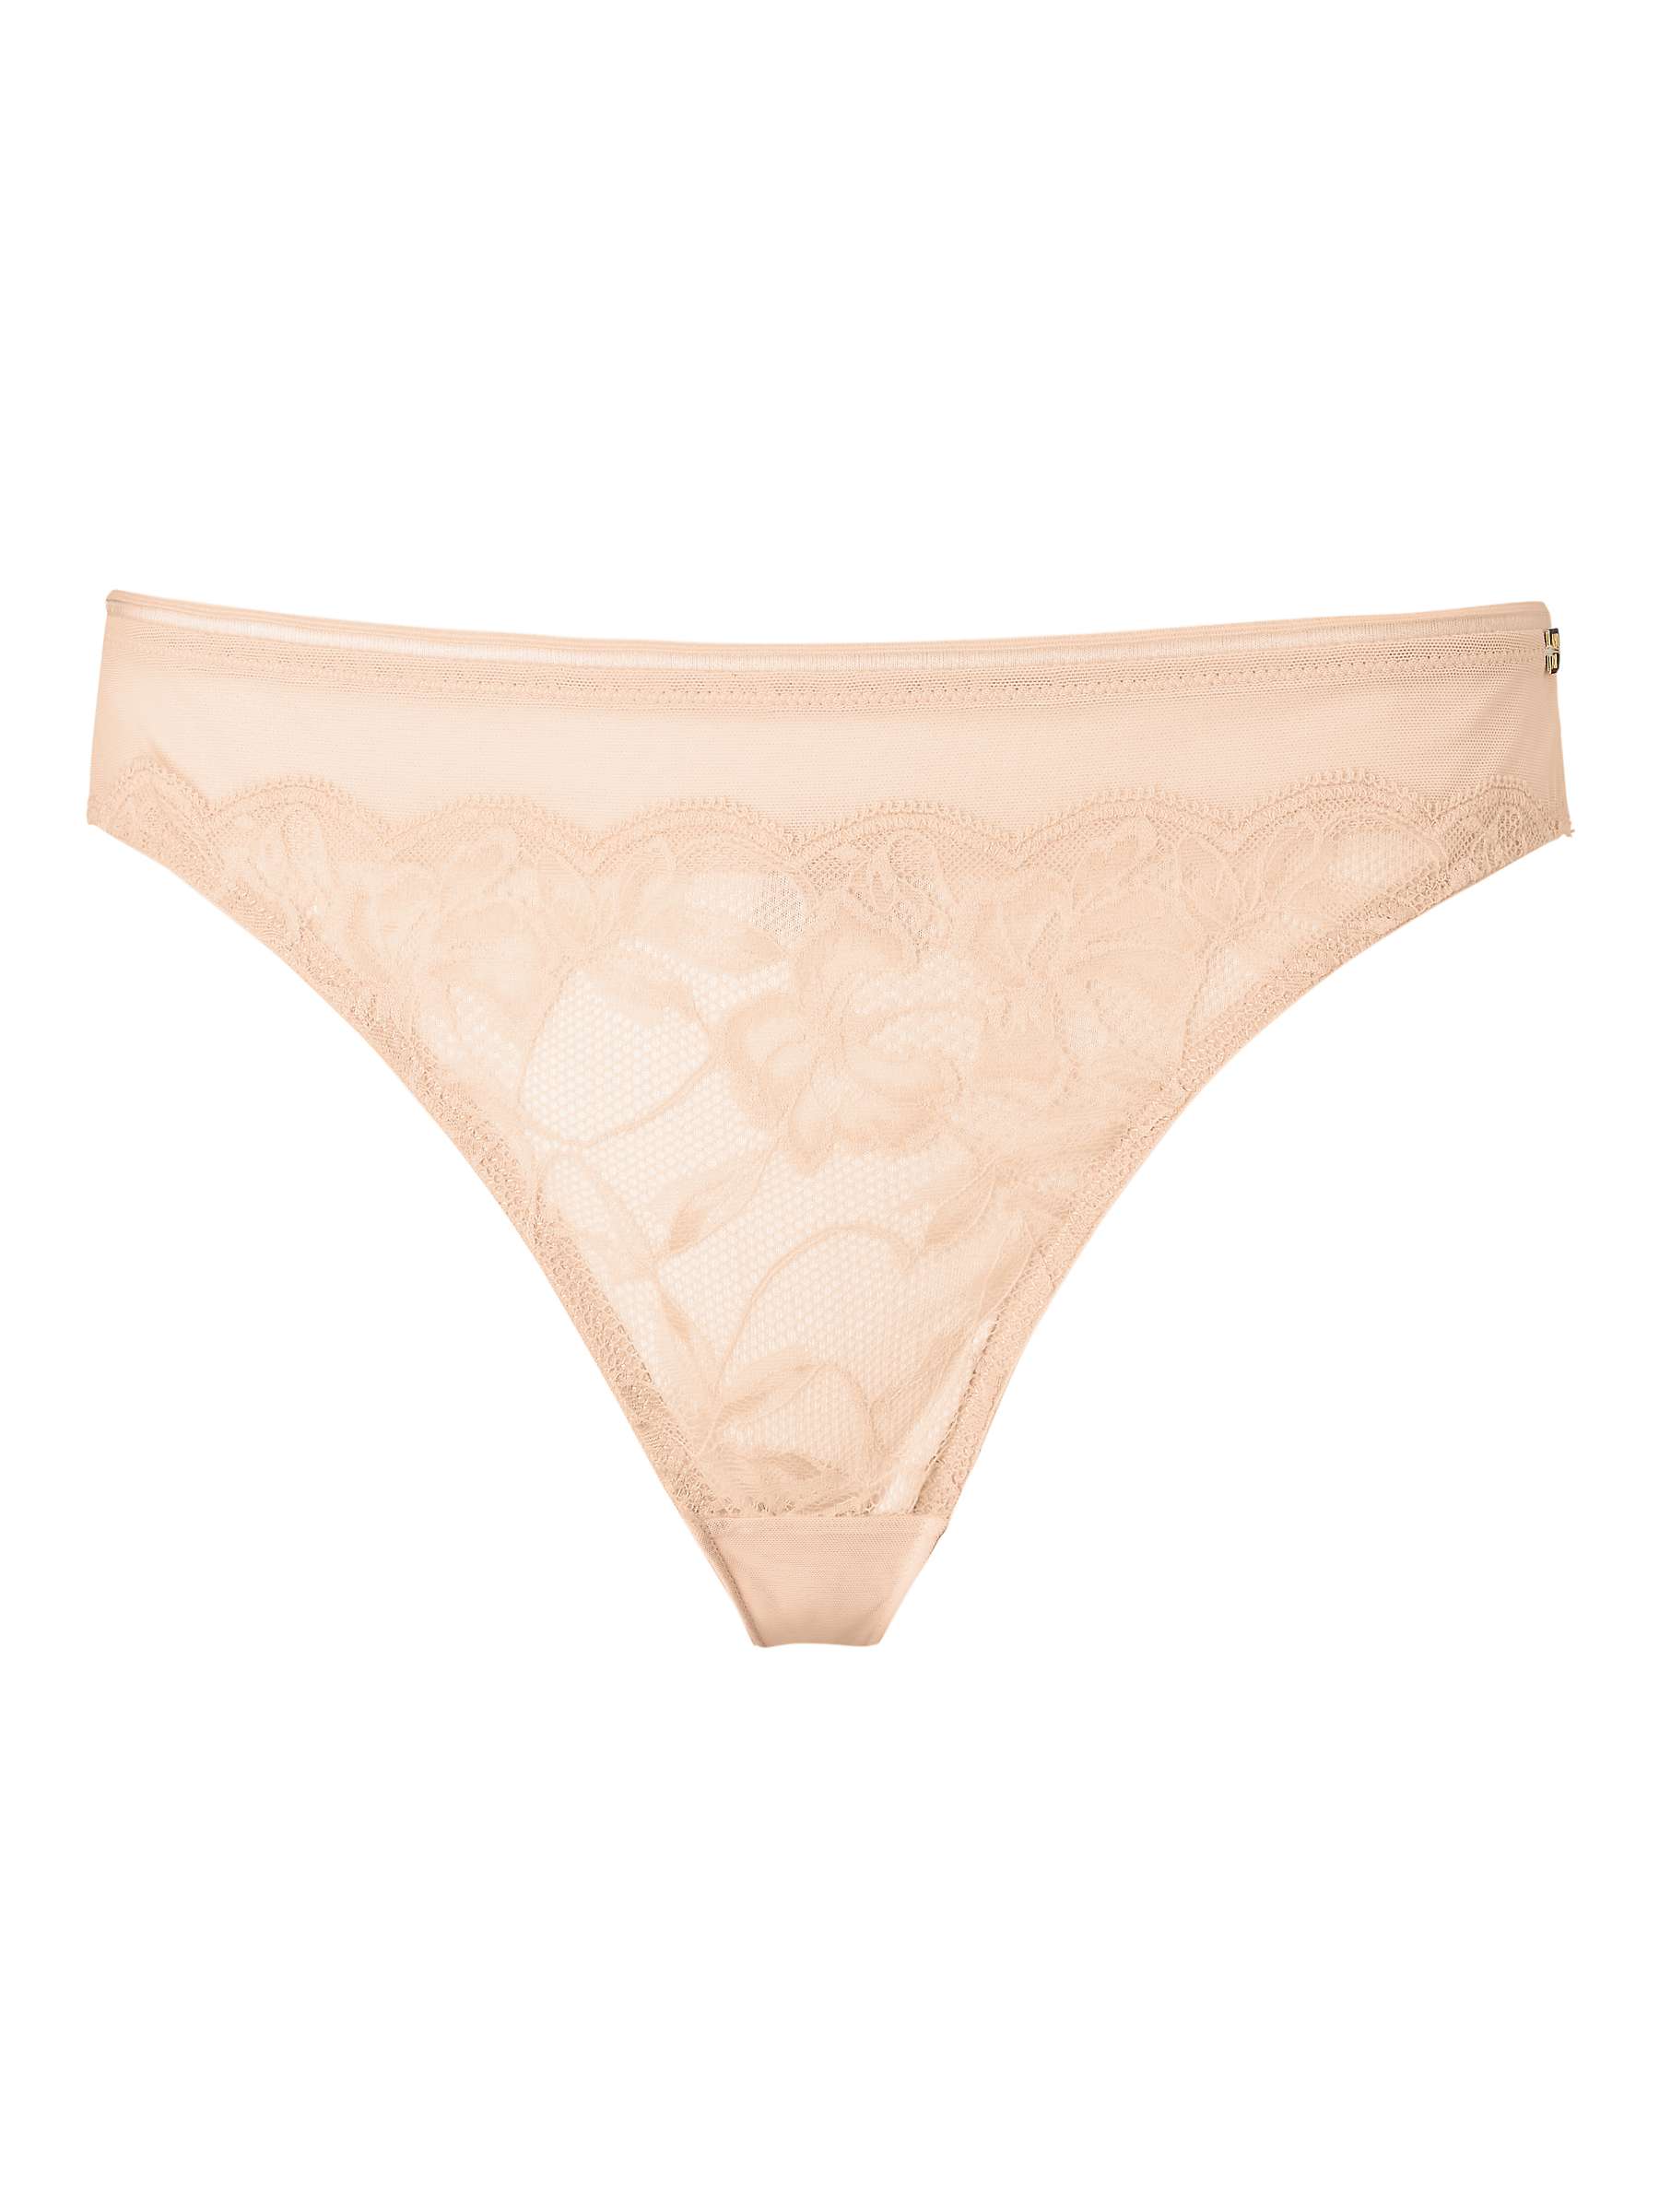 AND/OR Wren Lace Bikini Knickers, Almond at John Lewis & Partners